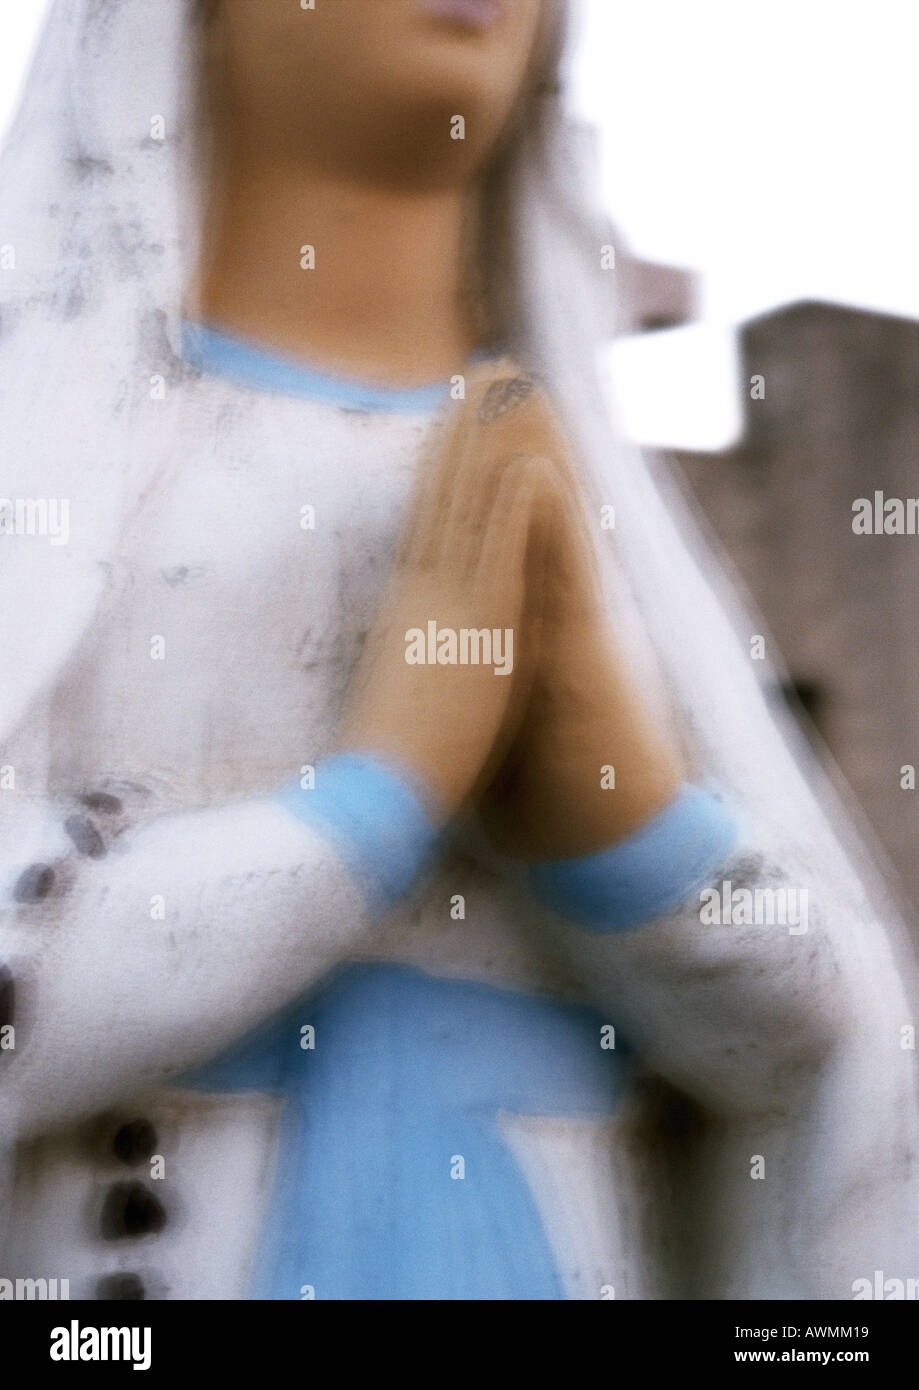 Statue of Virgin Mary with hands praying, partial view, blurred Stock Photo